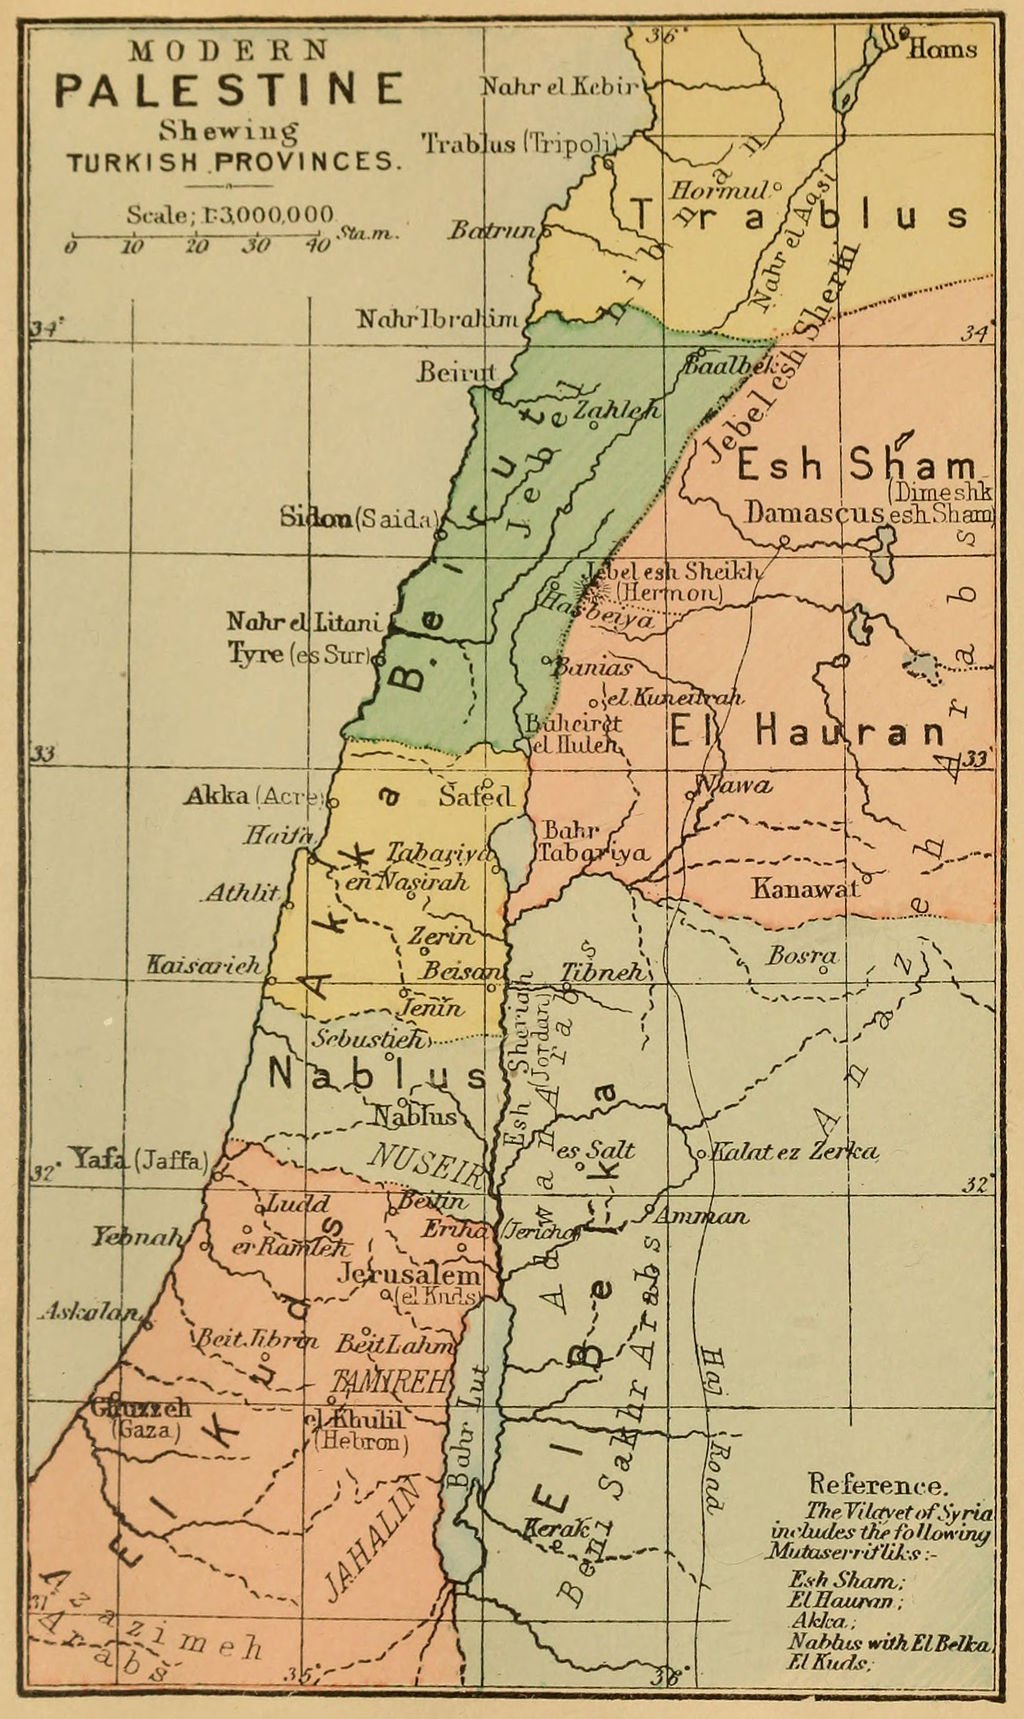 A map of Palestine showing the Ottoman provinces with Jerusalem marked El Kuds